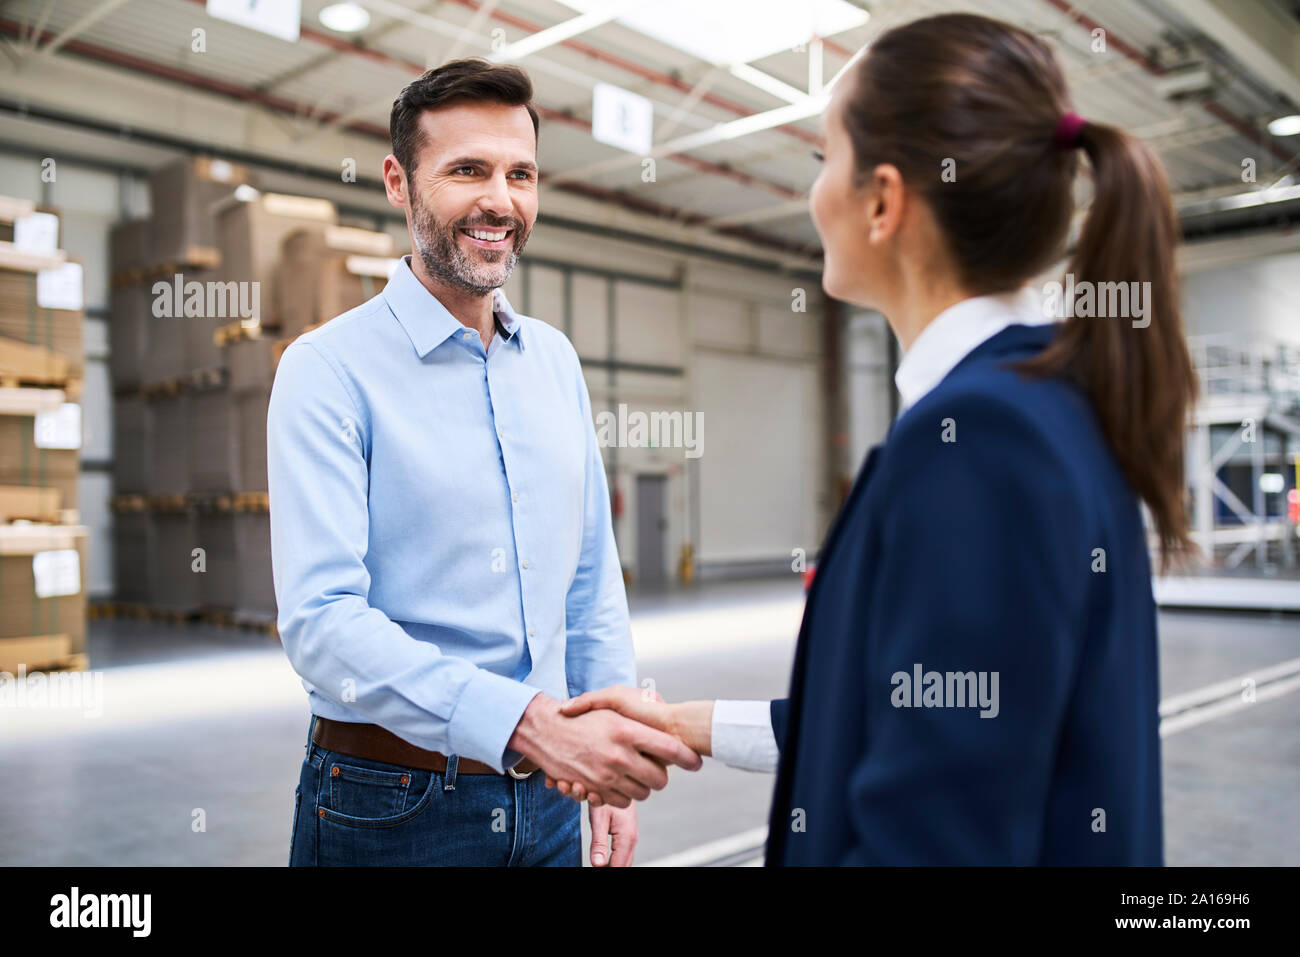 Businessman and businesswoman shaking hands in a factory Banque D'Images